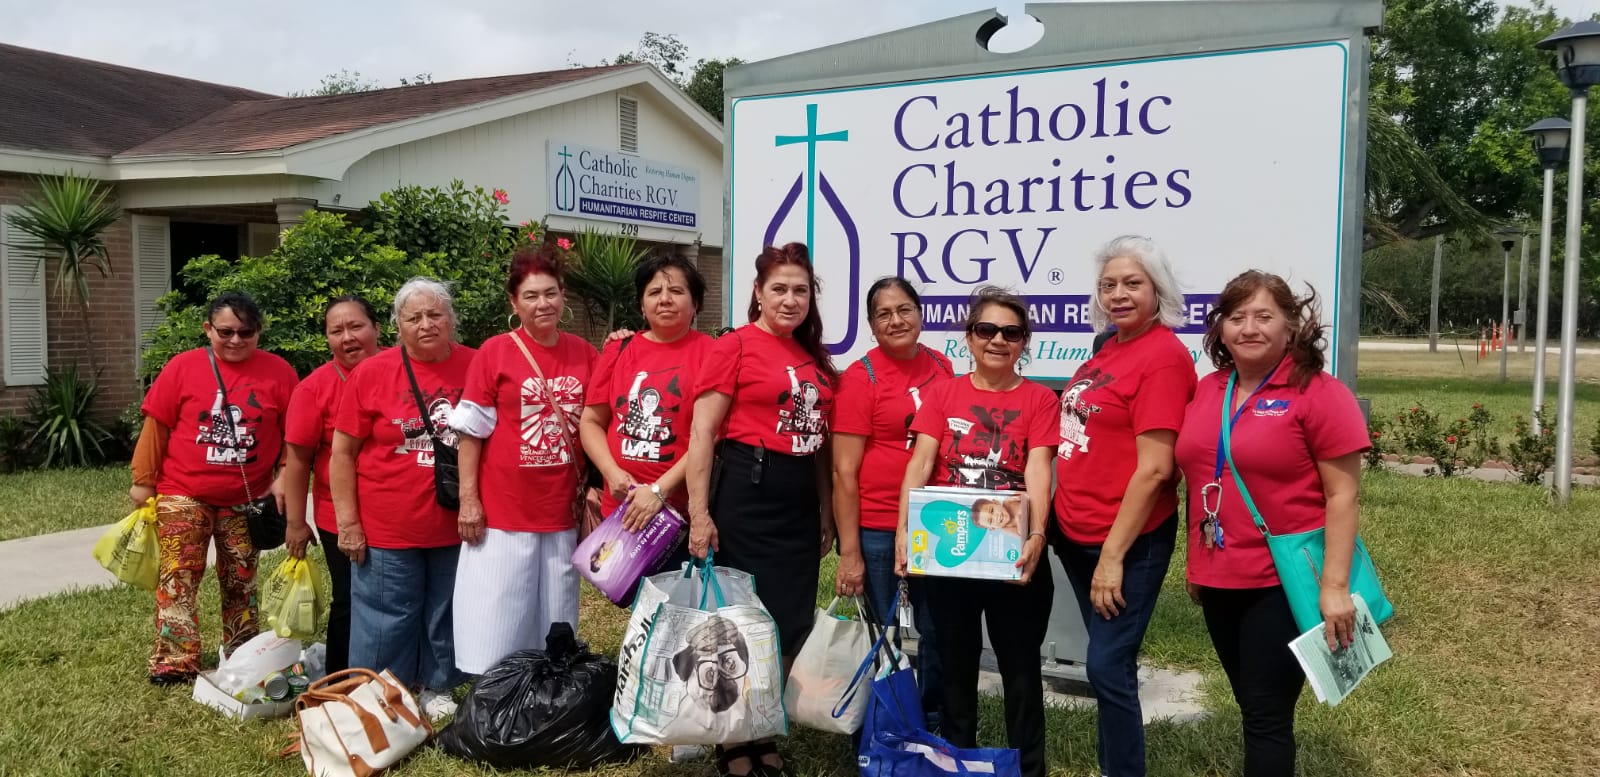 Group of women LUPE members dressed in red shirts hold supply donations in bags and boxes in front of sign that reads "Catholic Charities RGV"